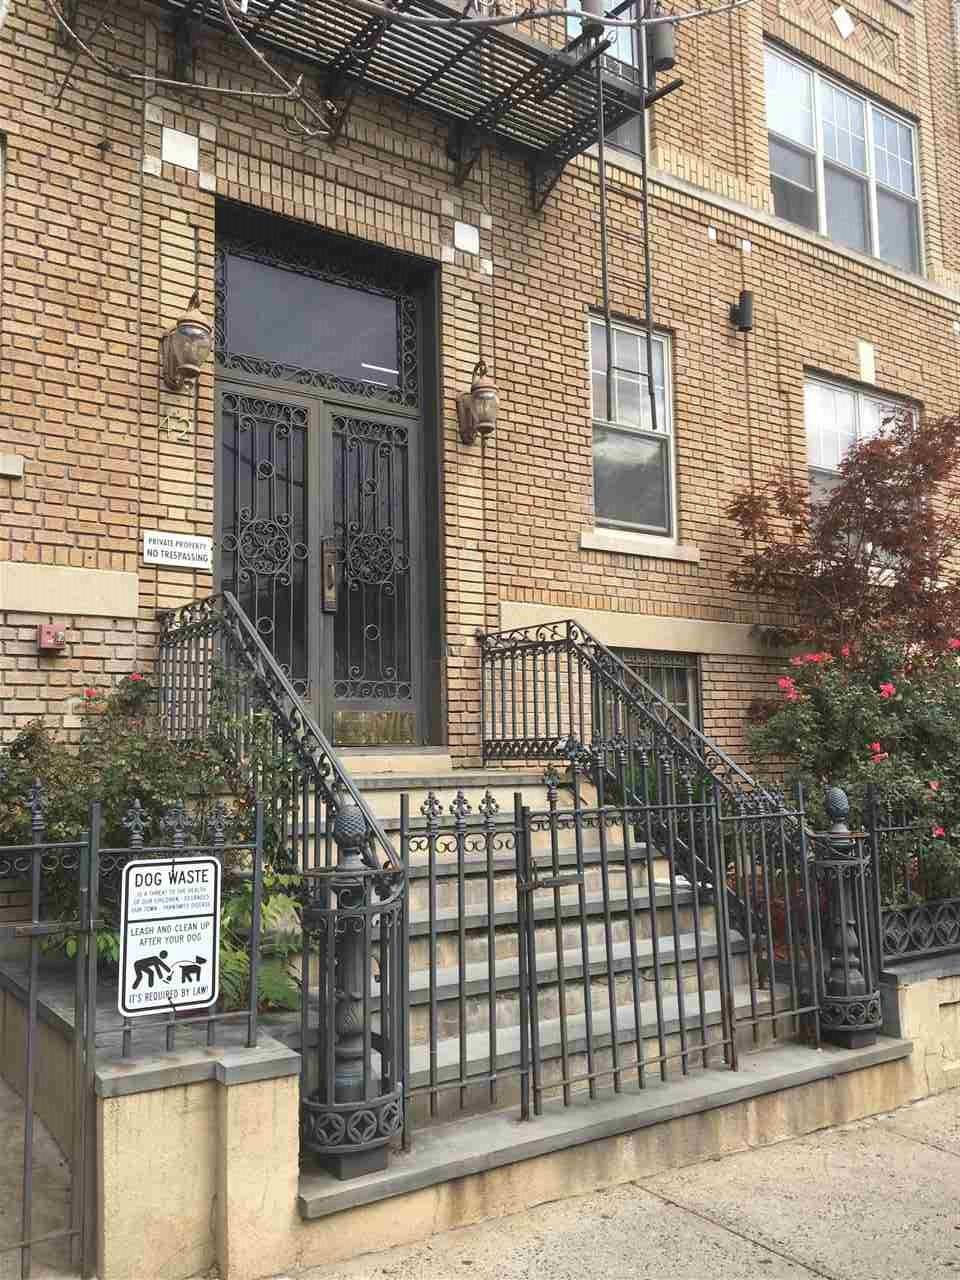 3 bedroom duplex with 2 full baths - 3 BR Condo New Jersey